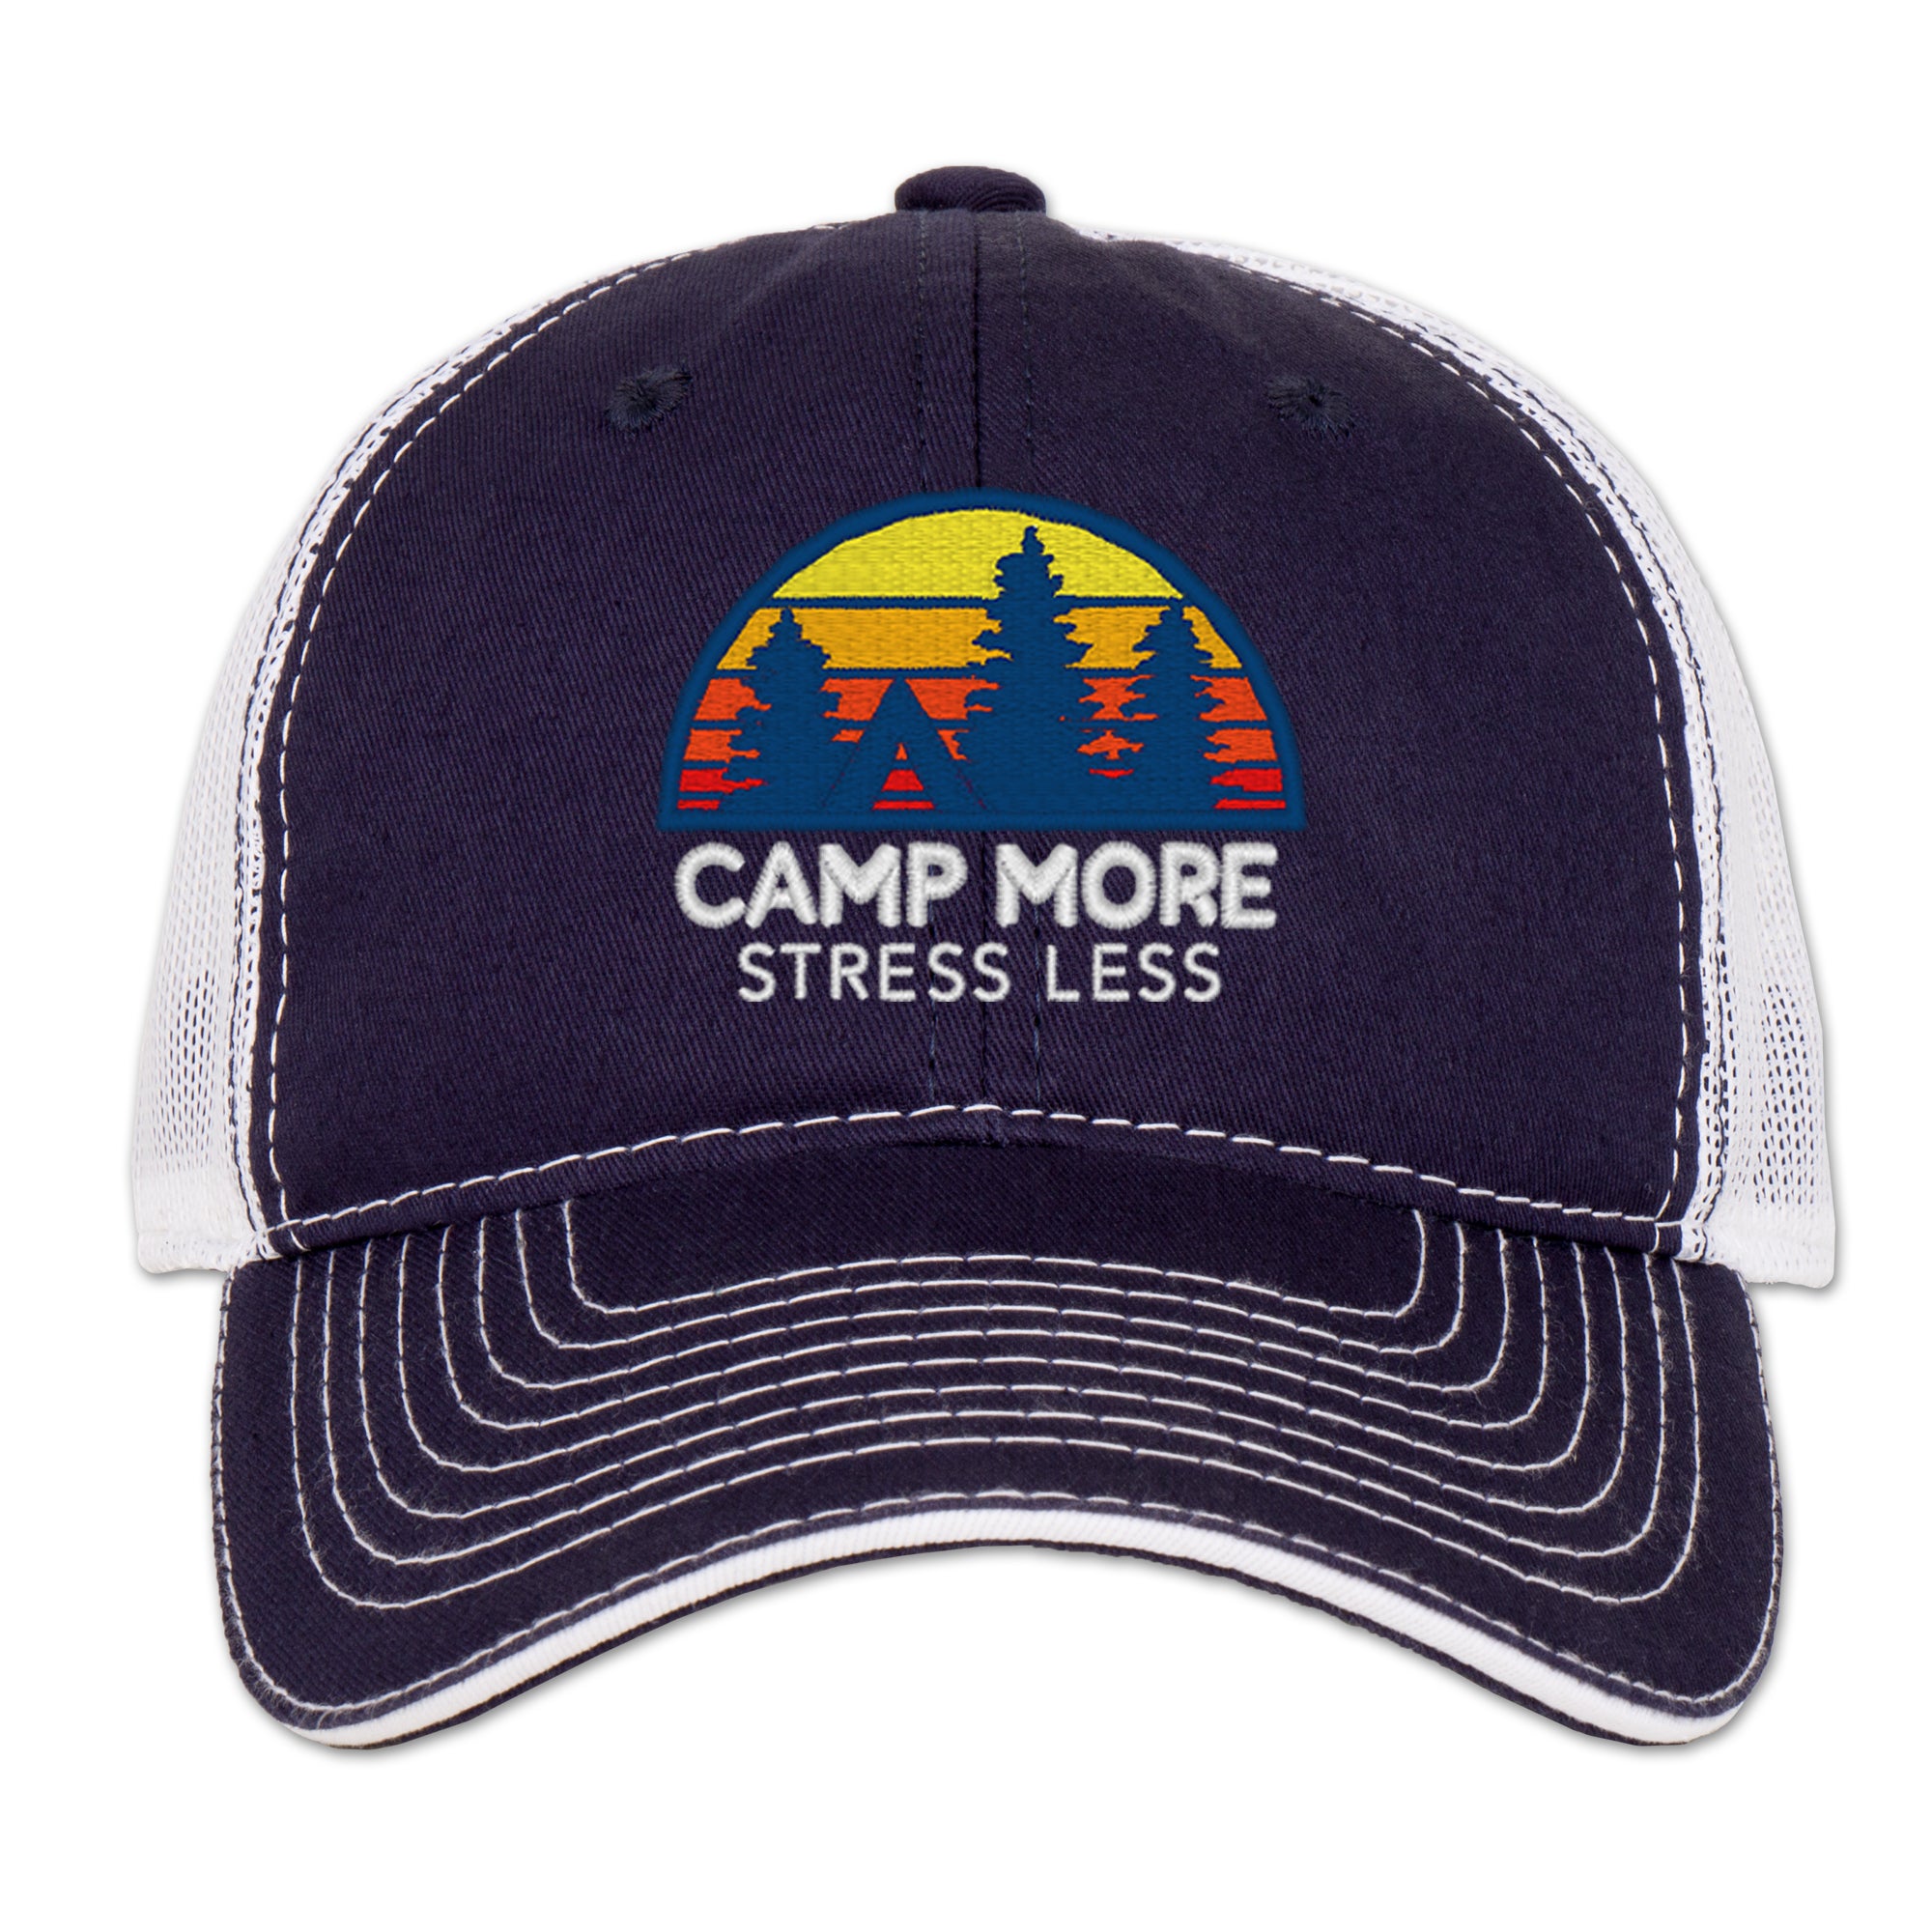 Earth Sun Moon Camp More Stress Less Trucker Hat - Navy/White - Adjustable